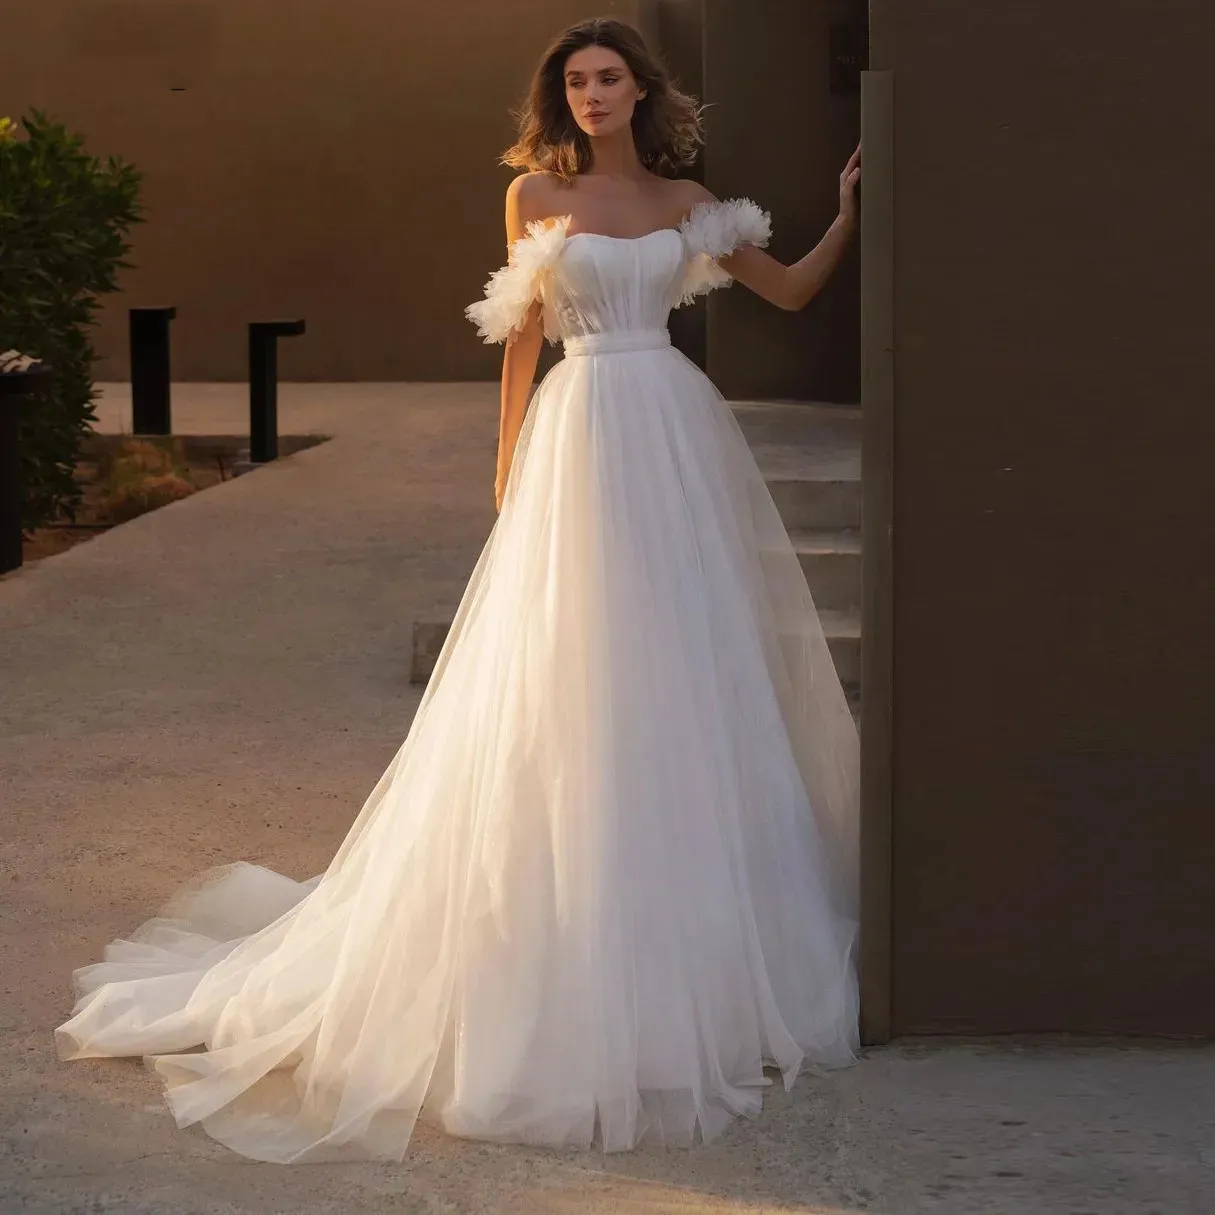 Princess White Off The Shoulder Wedding Dress Long Ruffles Sleeves Garden Appliques Bridal Gowns Robe De Mariage Ball Gowns Plus Size